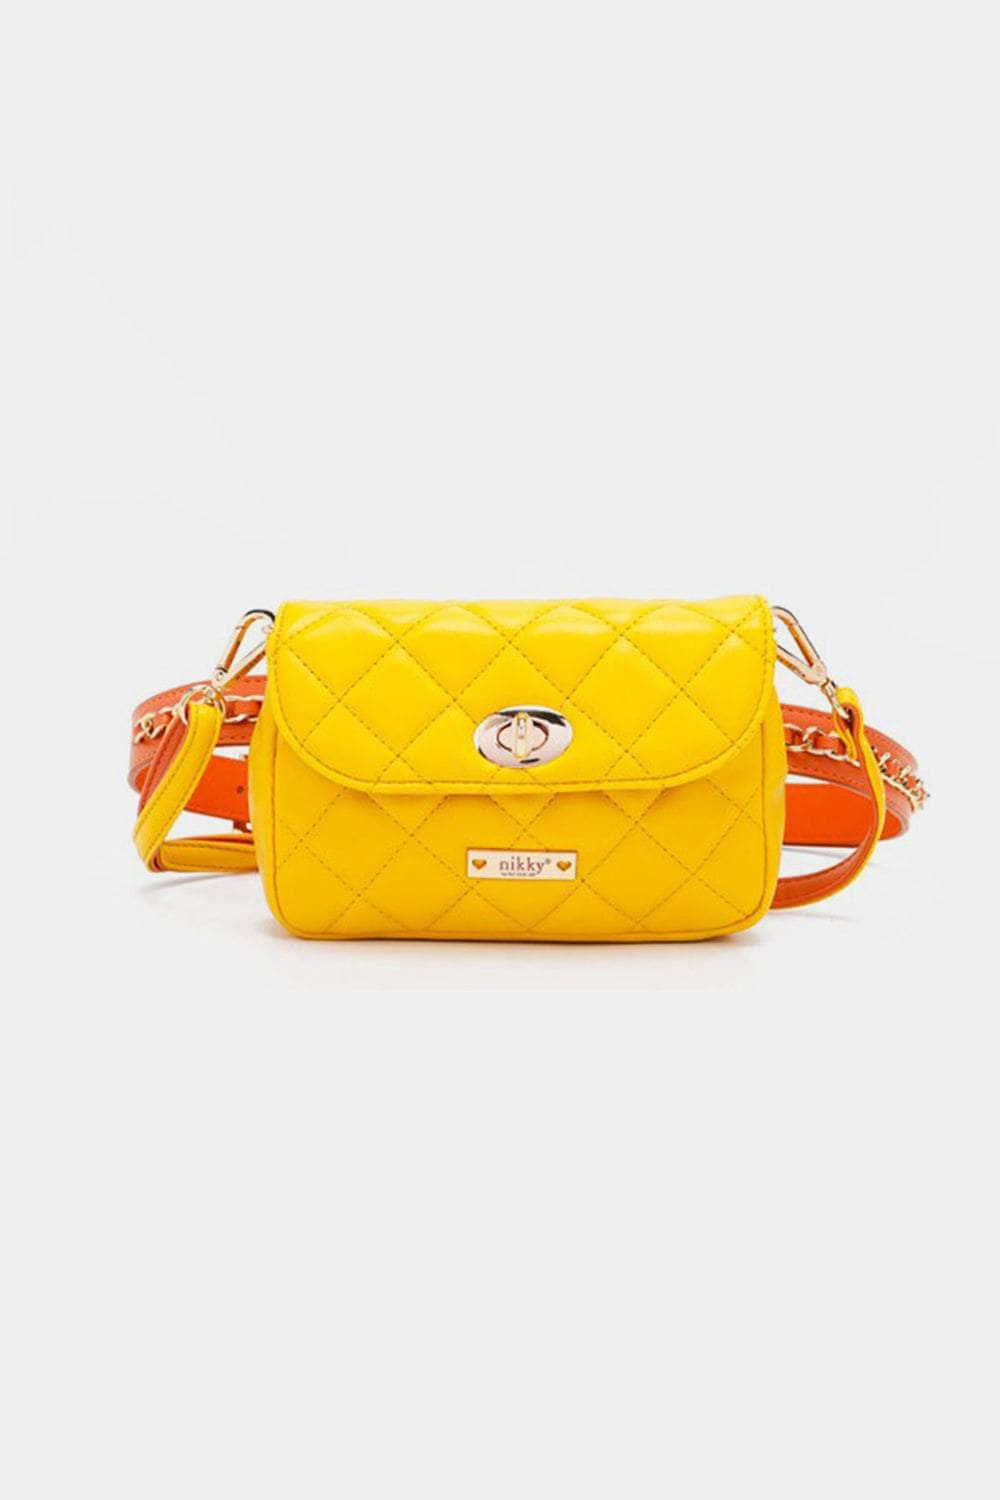 Nicole Lee USA Quilted Fanny Pack Yellow / One Size